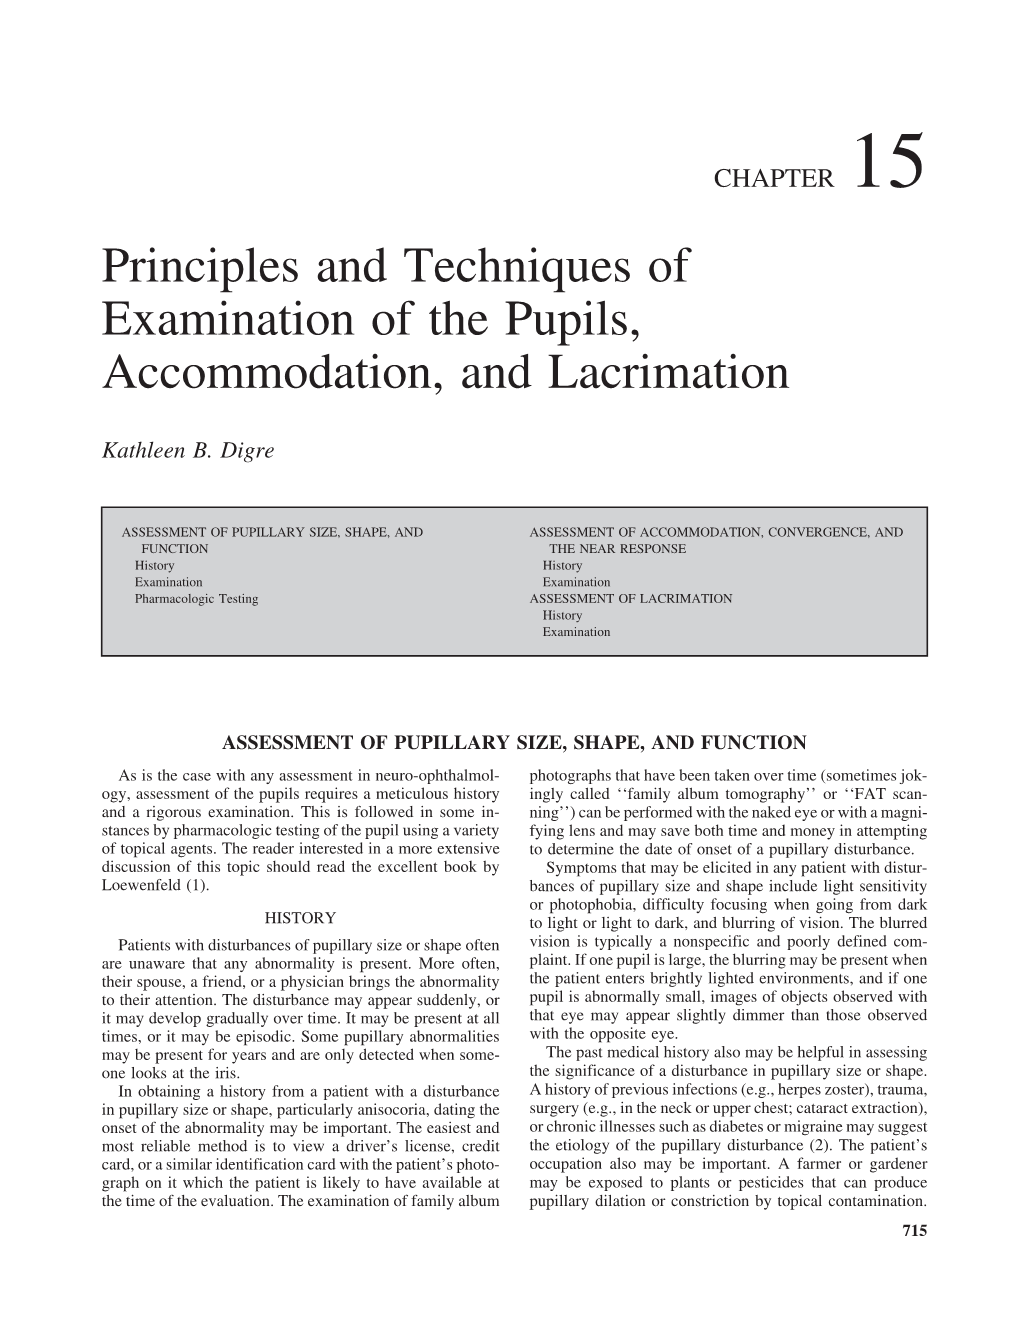 Principles and Techniques of Examination of the Pupils, Accommodation, and Lacrimation